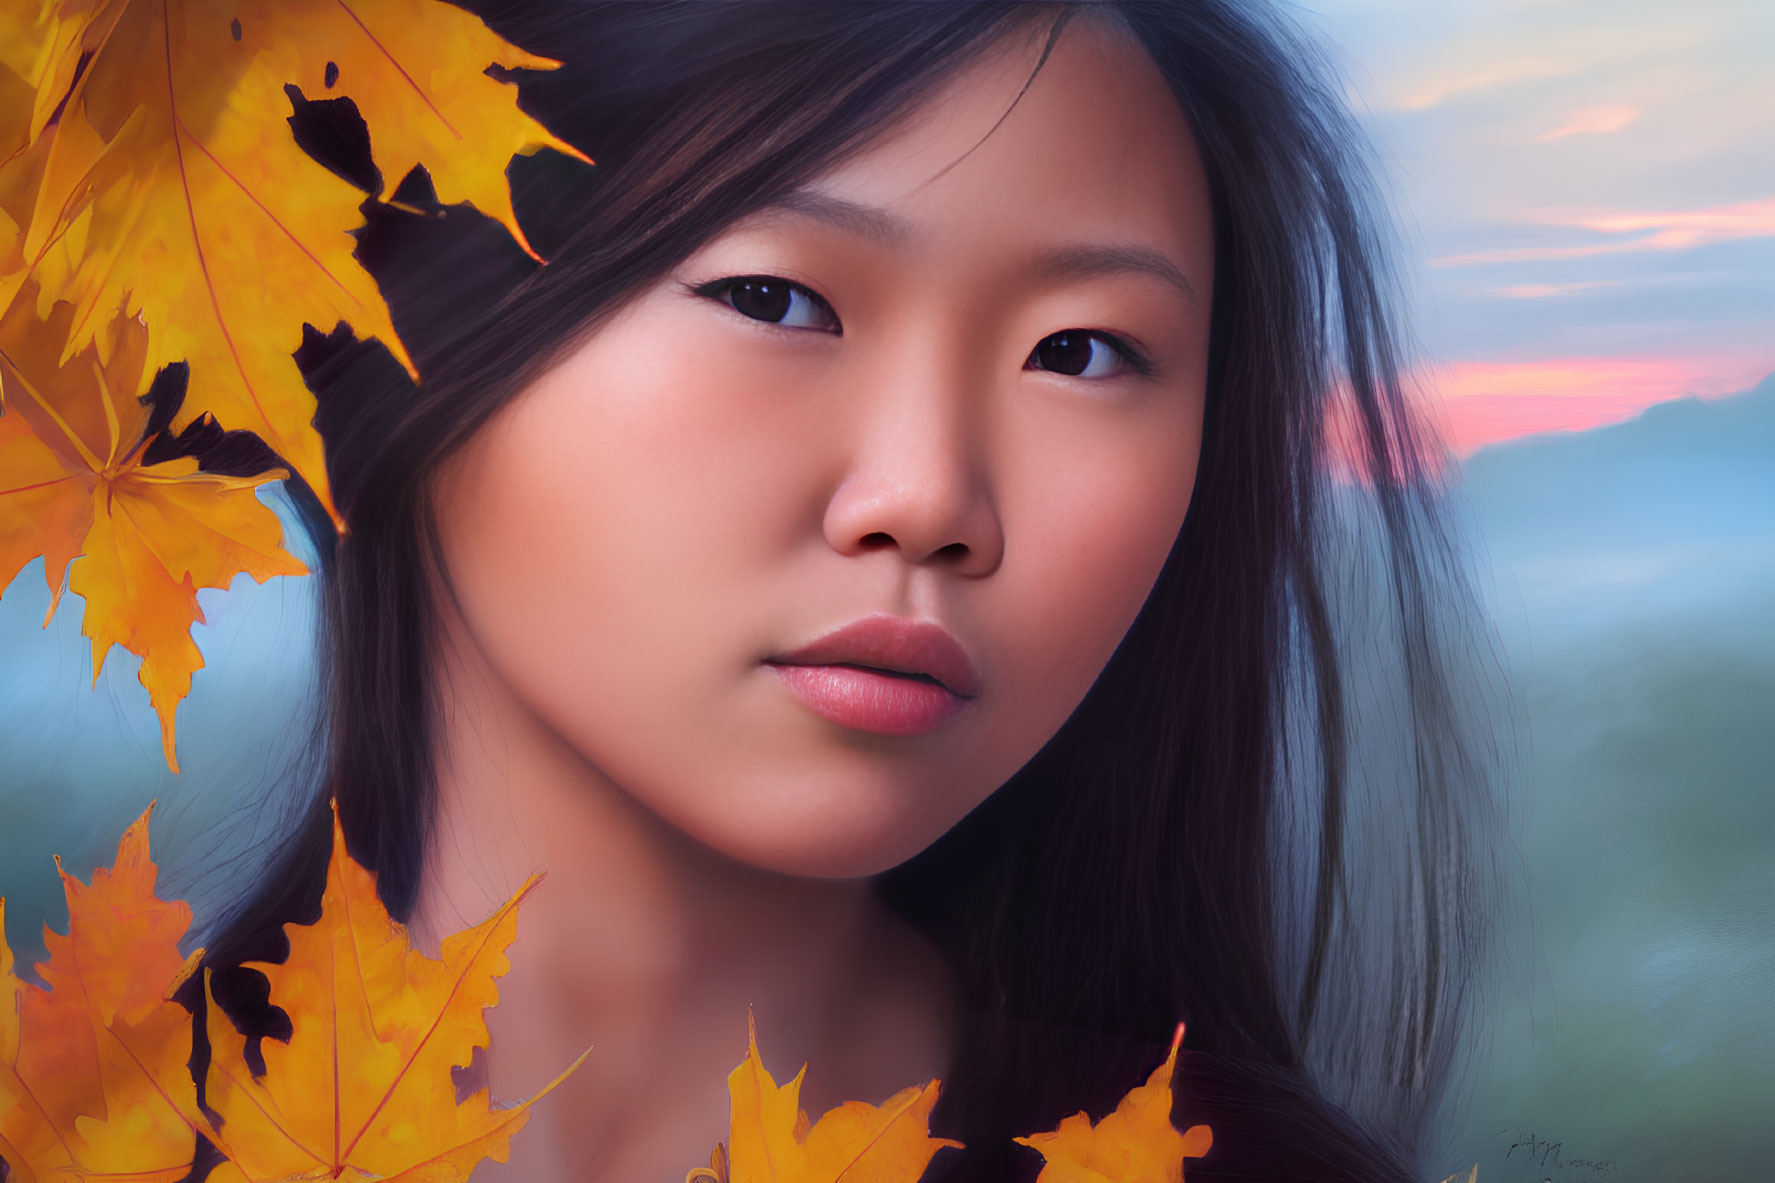 Young woman portrait with serene expression, autumn leaves, and soft-focus sunset background.